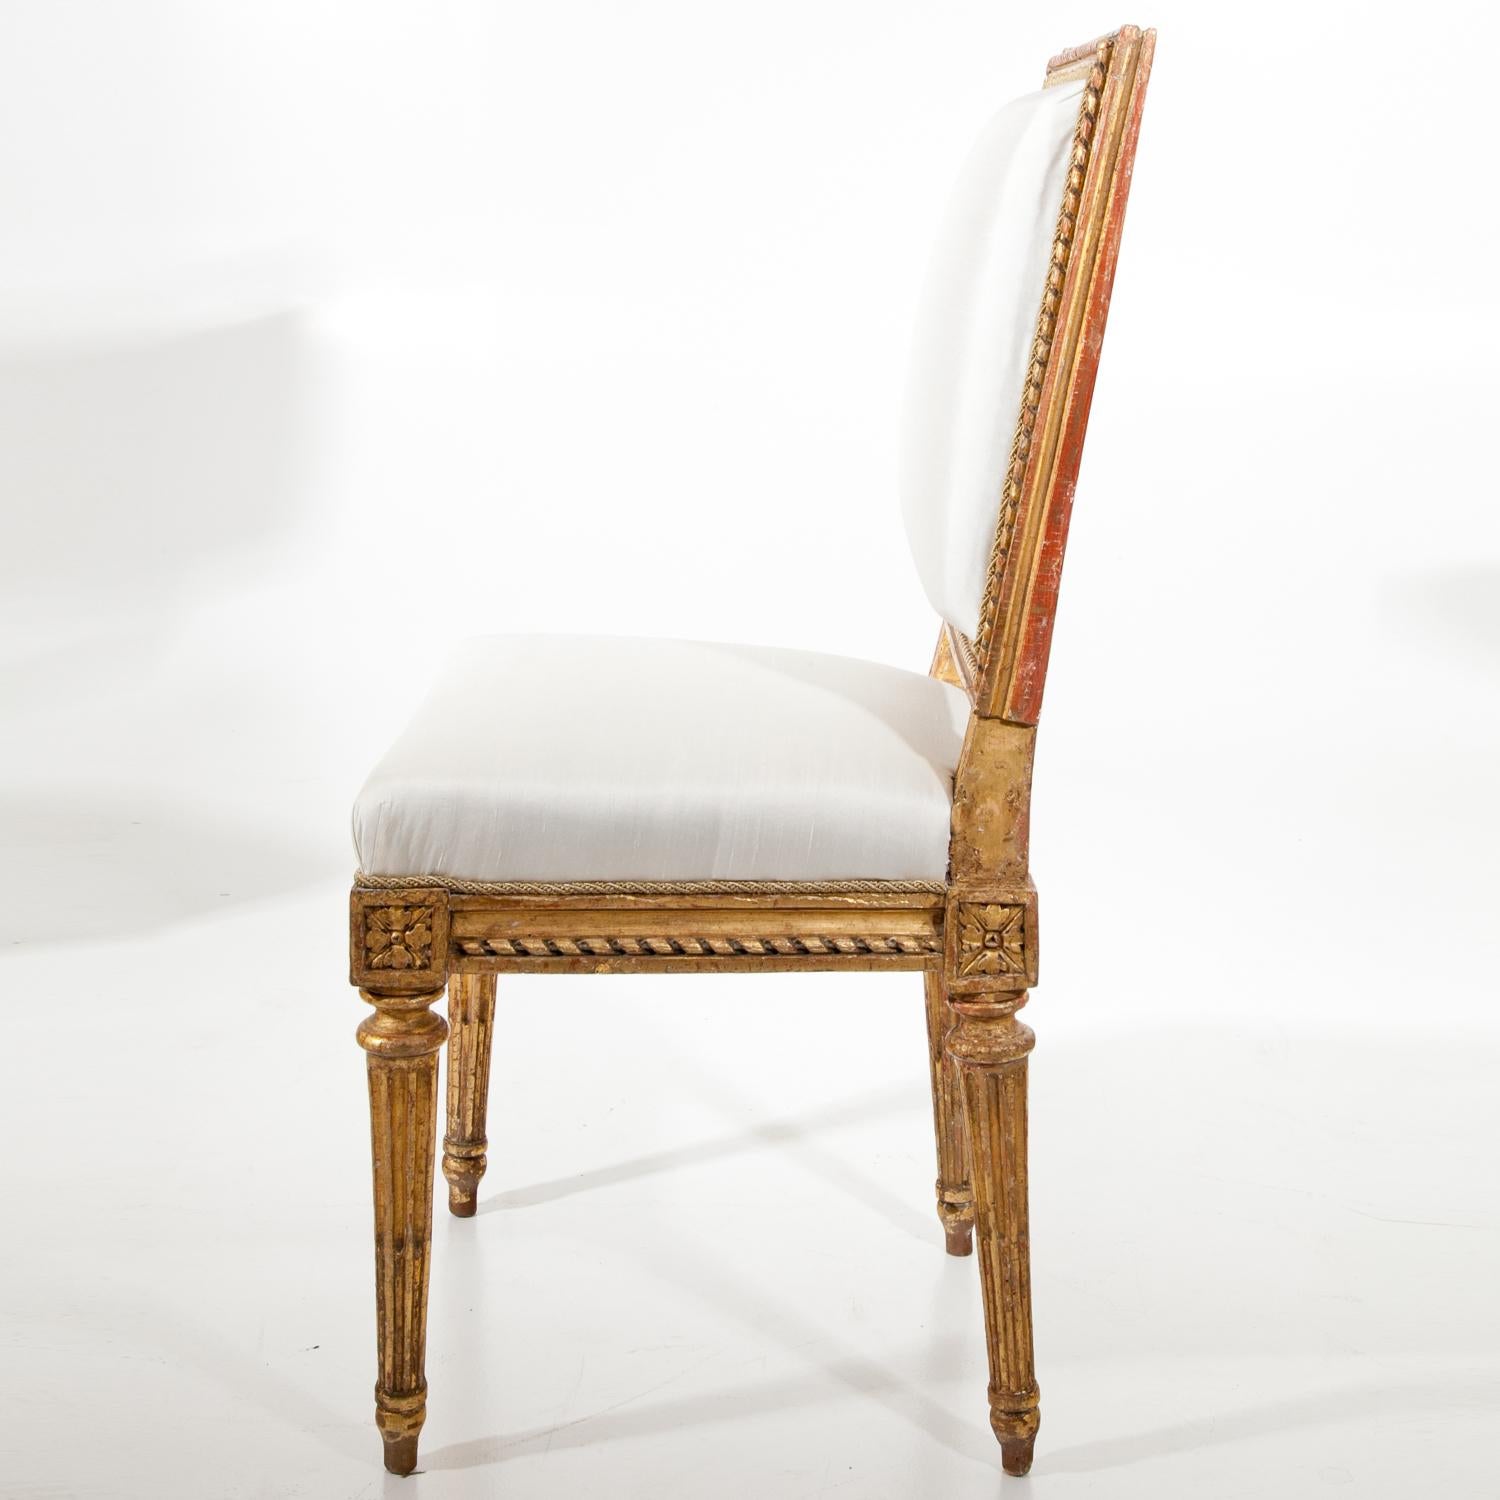 Gilt children’s chair by Jean Baptiste Boulard (1725-1789) standing on fluted tapered legs, with a reupholstered backrest and seat in white. Stamped at the bottom JB Boulard.